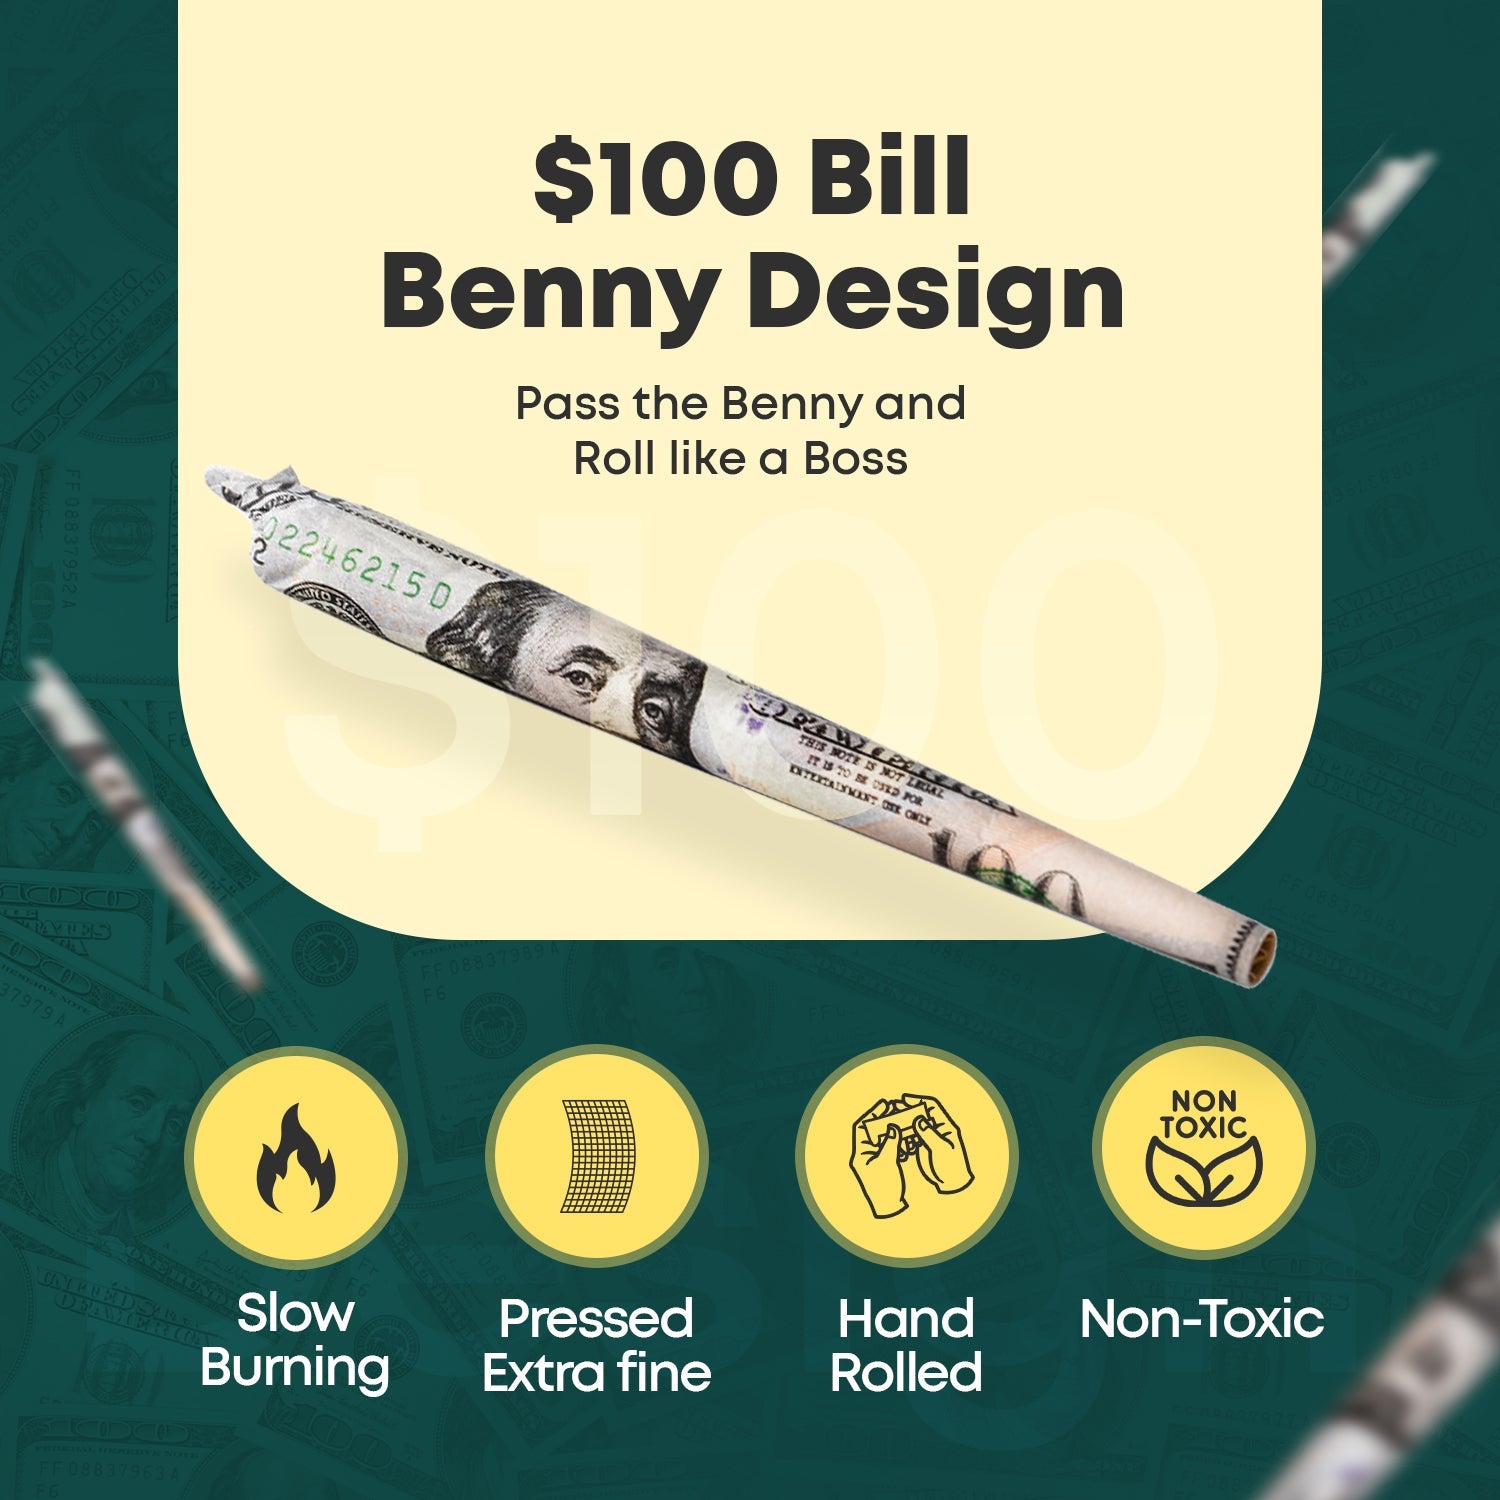 Empire Rolling's King Size Organic Hemp Rolling Papers, eco-friendly and crafted with high-quality, natural materials for a premium smoking experience.BENNY Wallet - Empire Rolling Papers